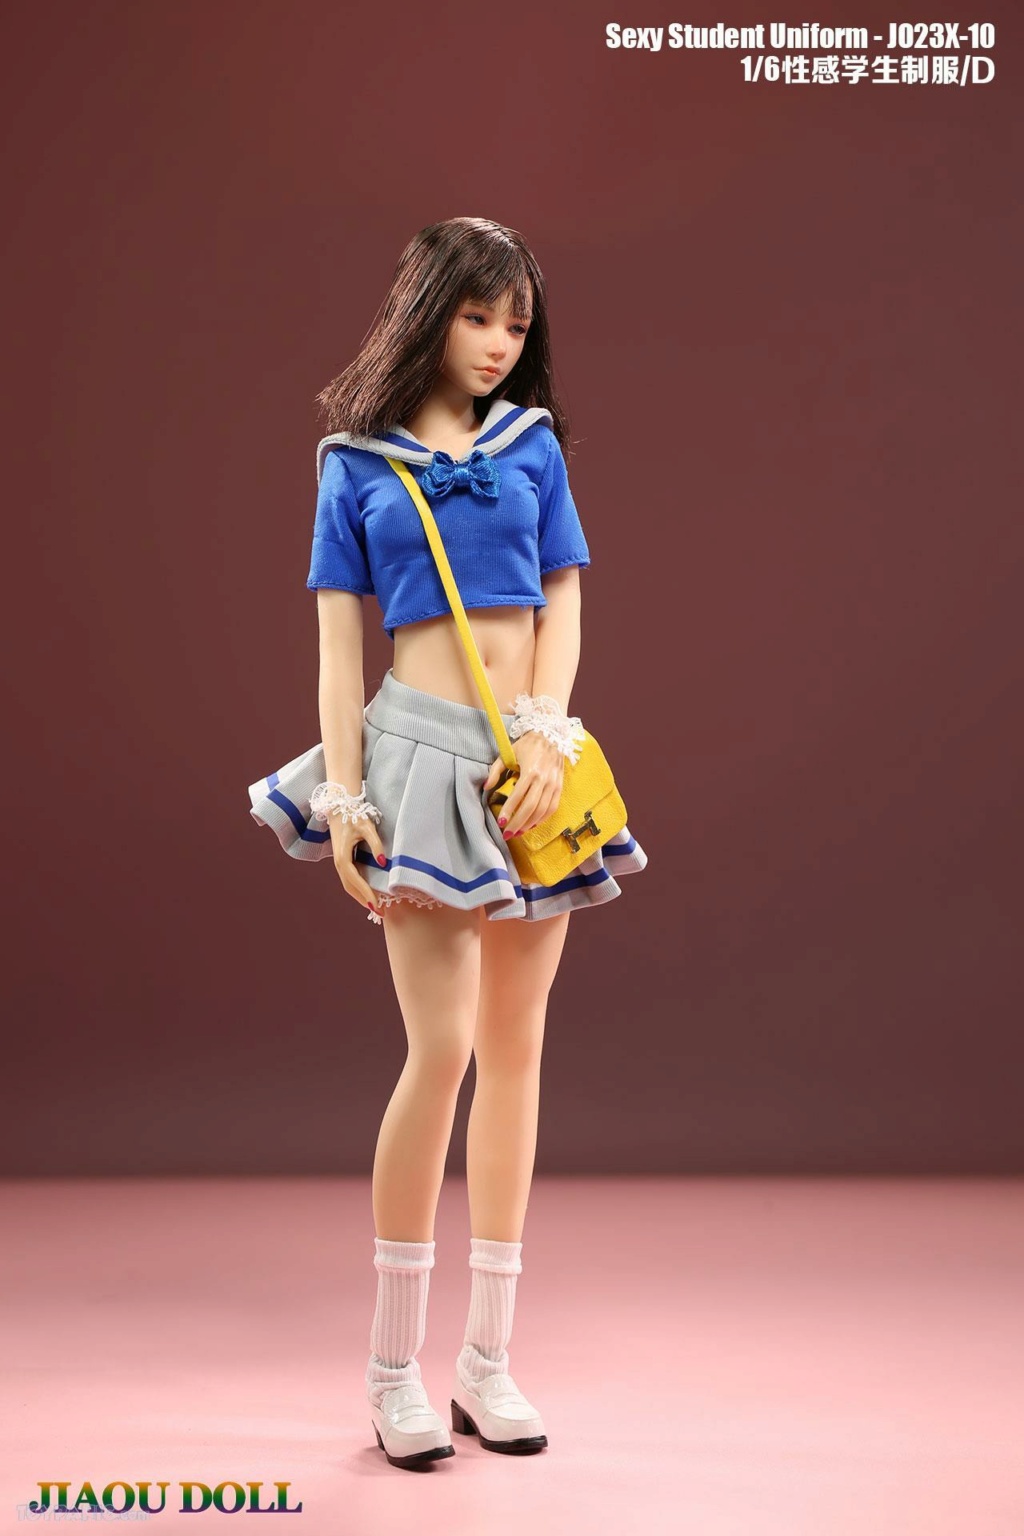 accessory - NEW PRODUCT: Jiaou Doll: 1/6 Sexy Student Uniform (7 color options) (JO23X-10A-G) (NSFW) 20920231